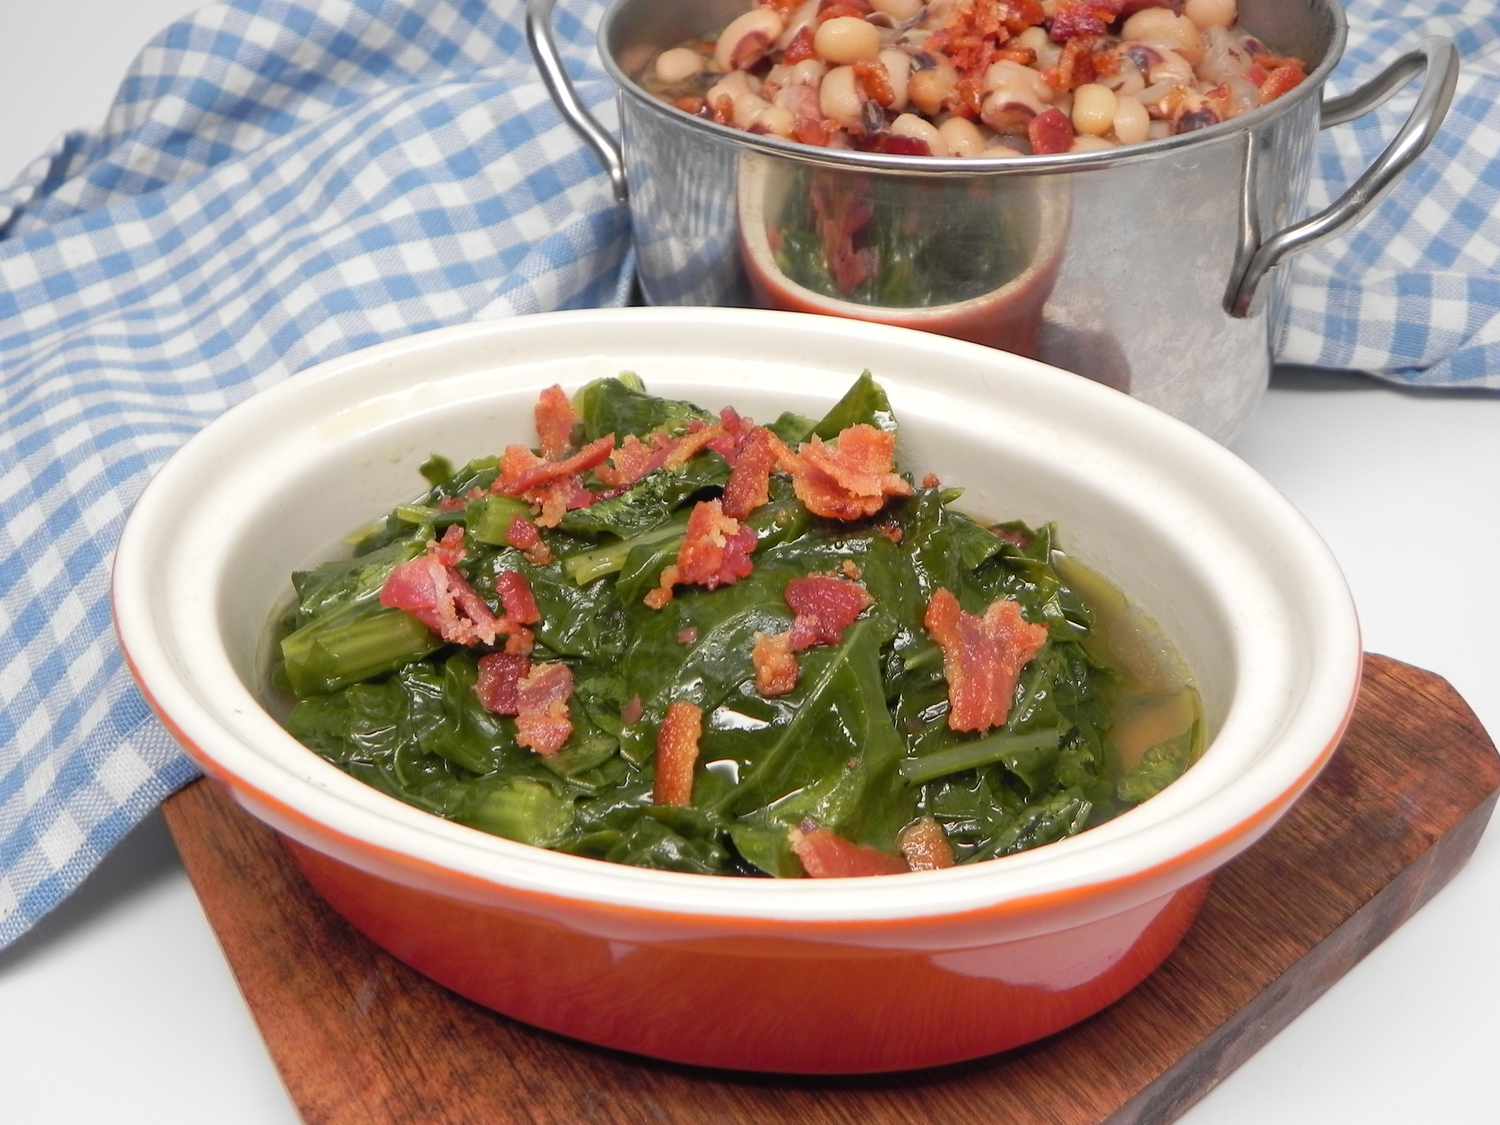 Southern Turnip Greens: Nutritional Benefits & Tasty Recipes